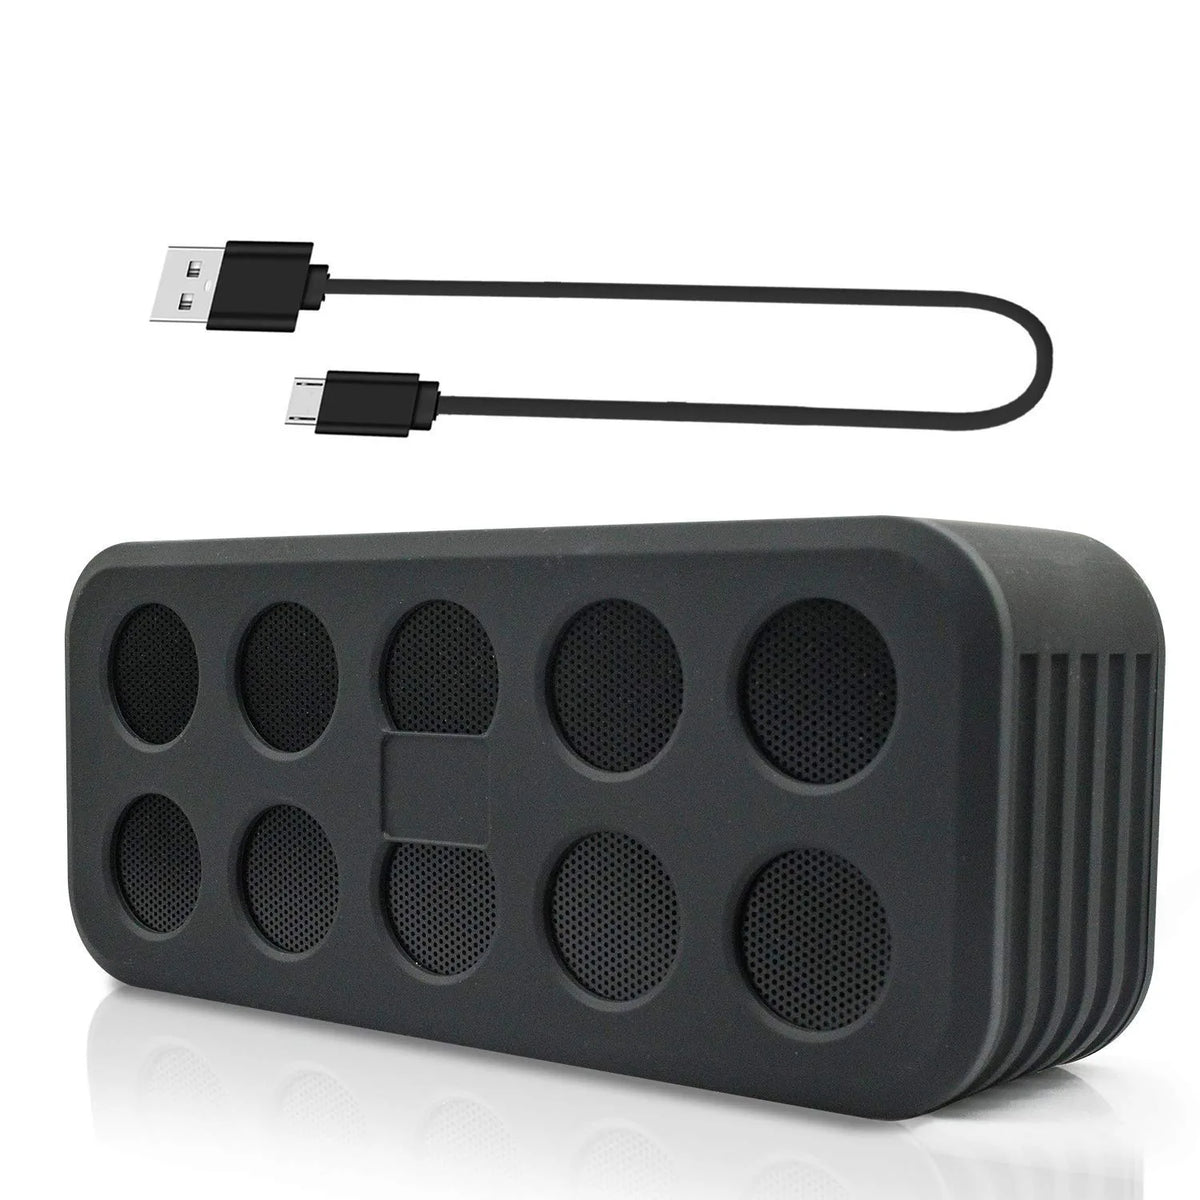 Bluetooth Speaker with Loud Stereo Sound, Rich Bass, 6-8 Hour Playtime for All Smartphone, Laptop, Computer